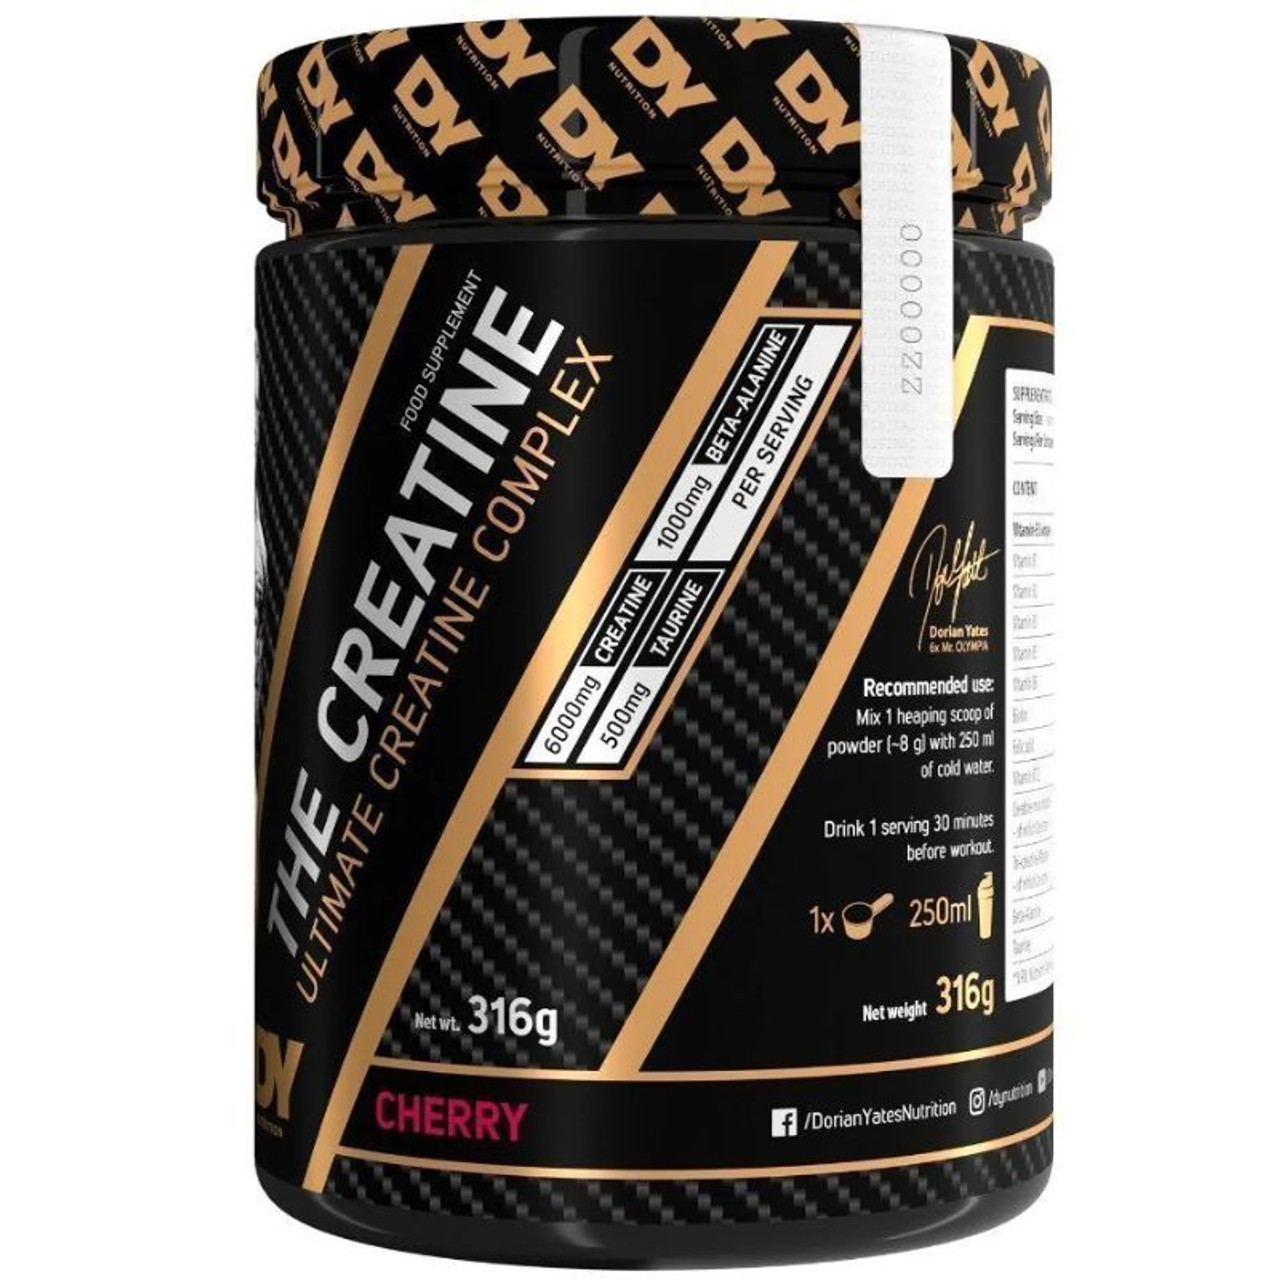 The Creatine DY Nutrition 316g Cherry